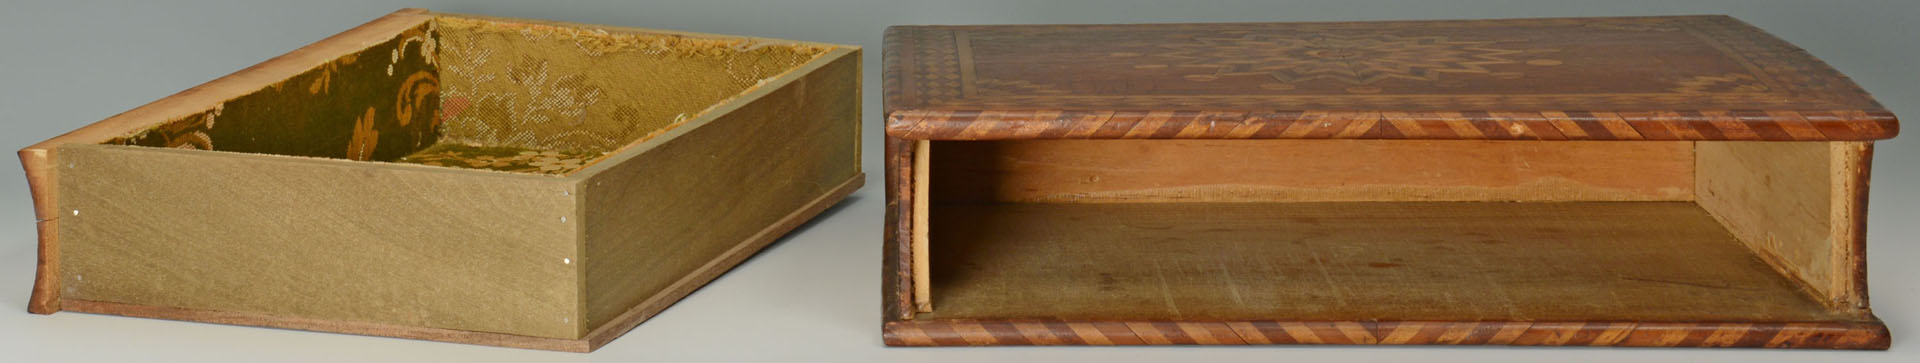 Lot 70: Lot of two folk art inlaid boxes, one book box